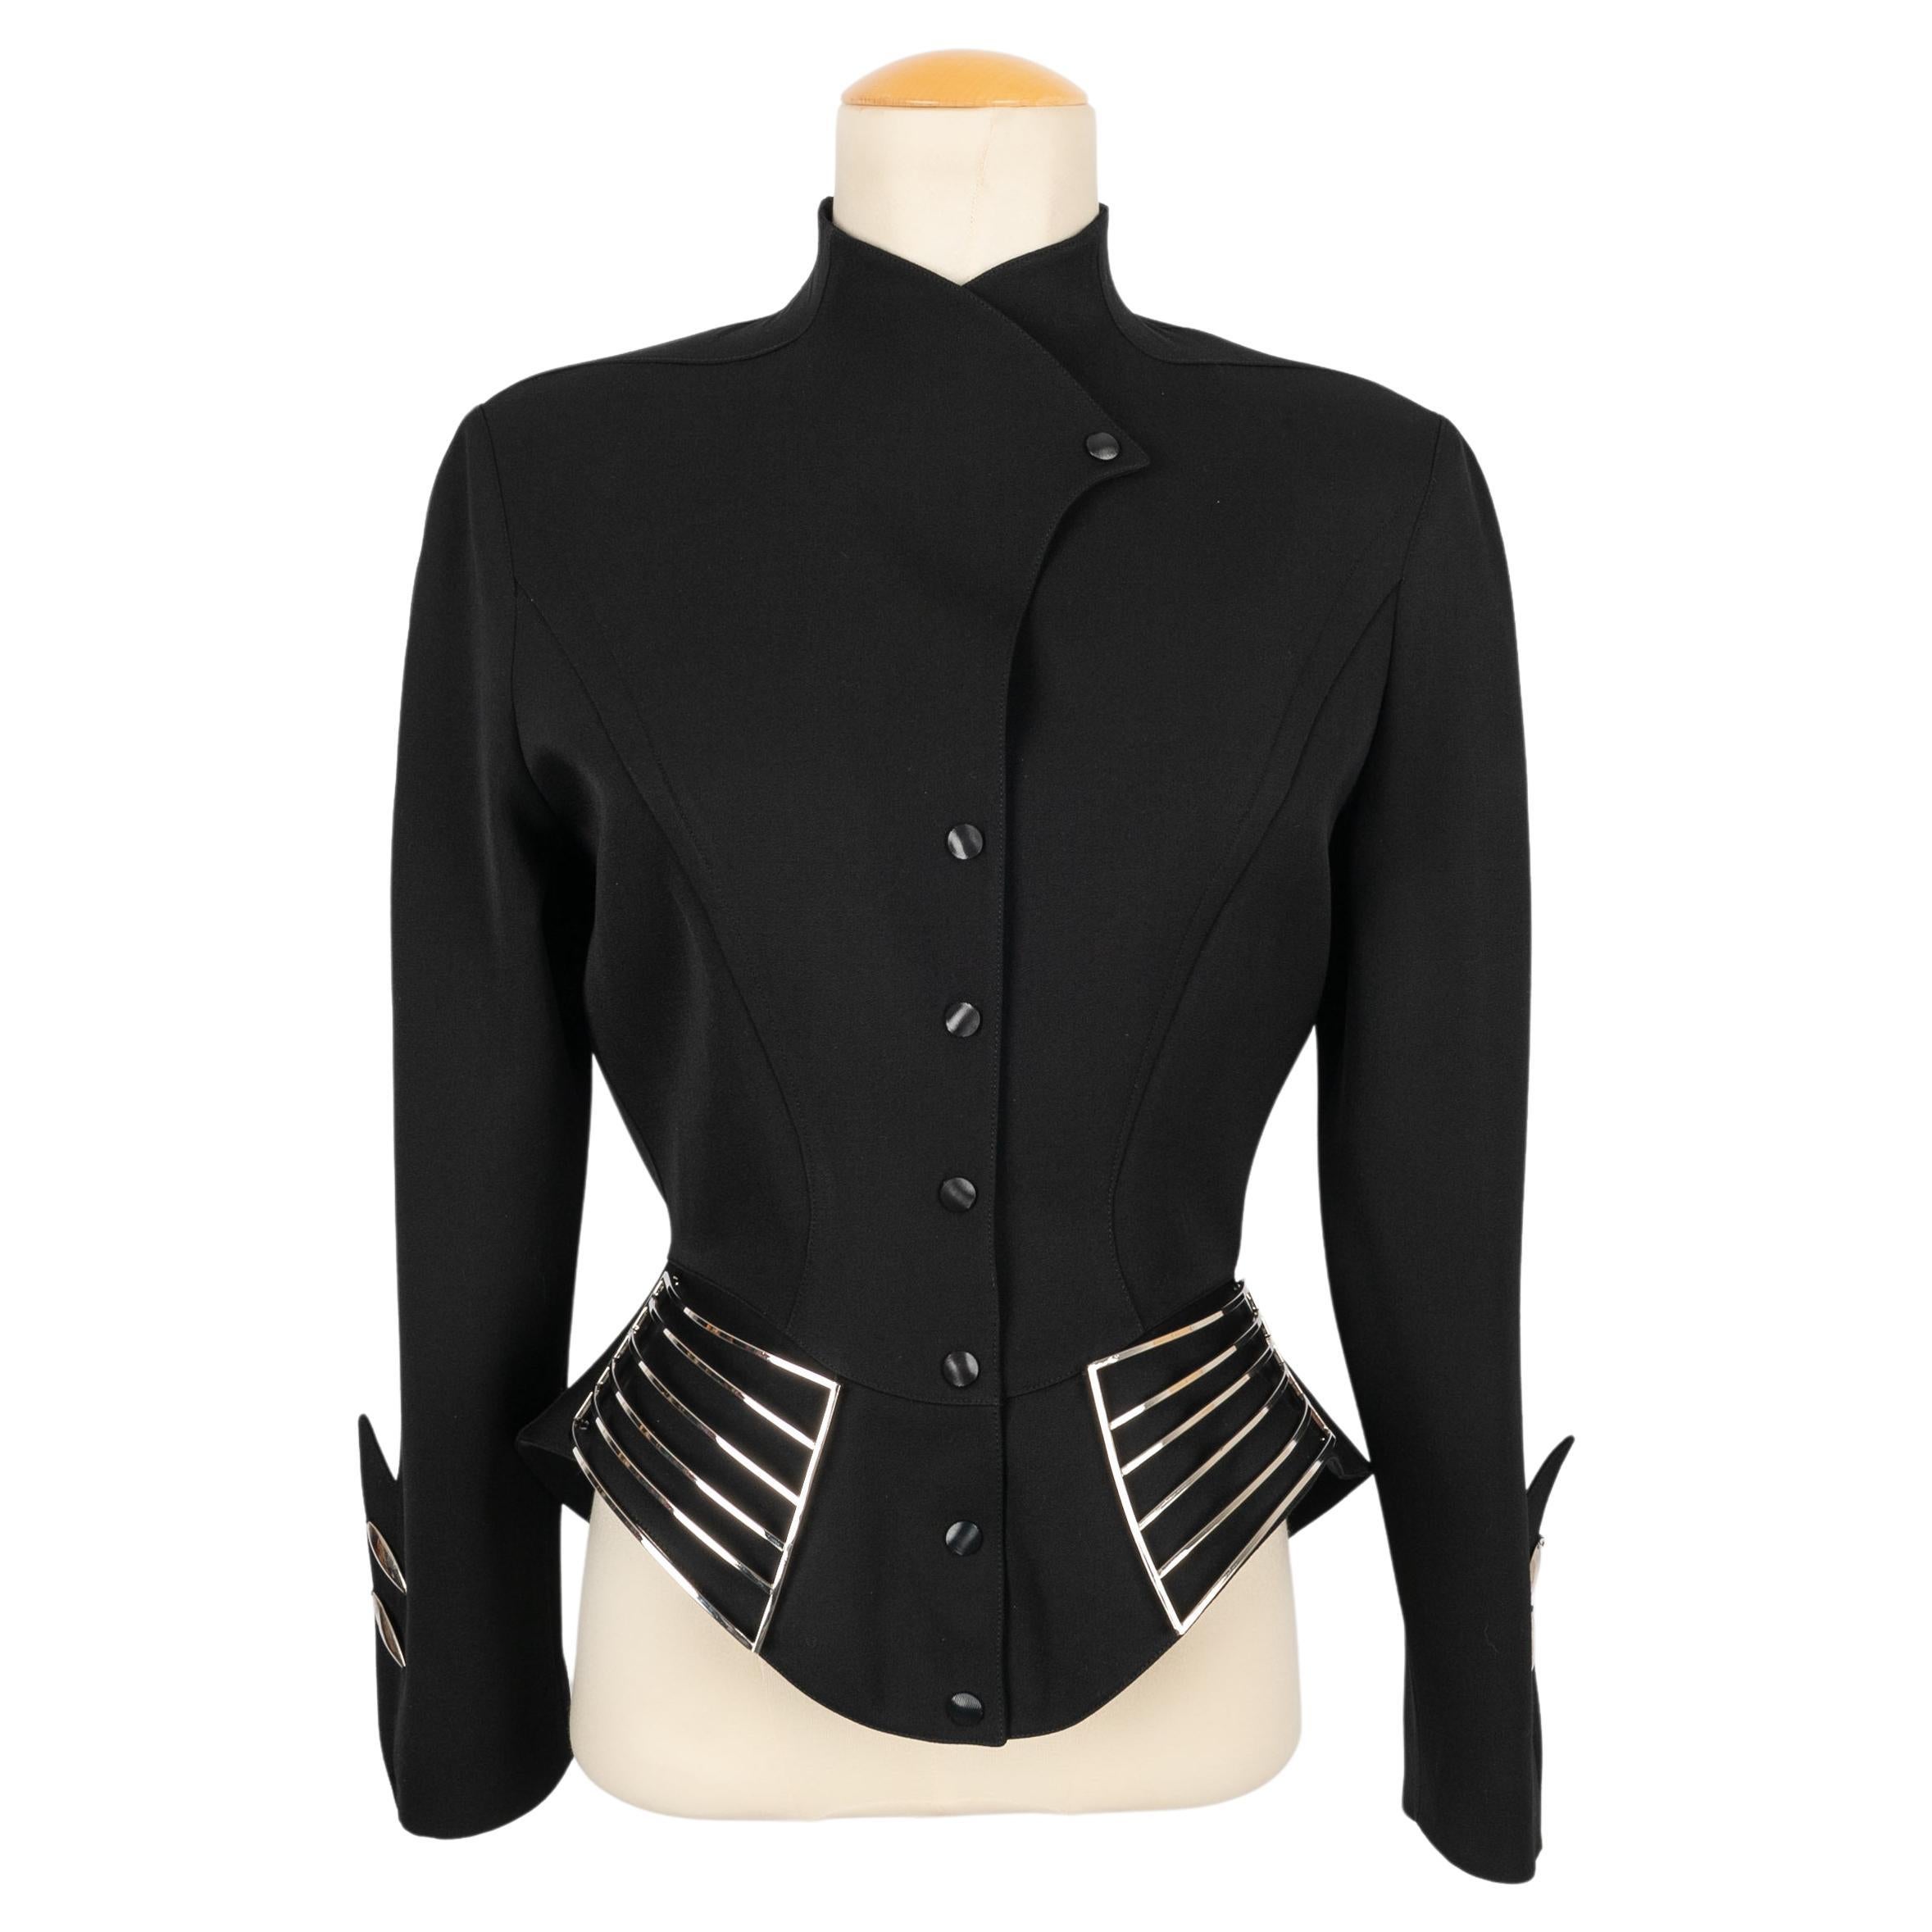 Thierry Mugler jacket For Sale